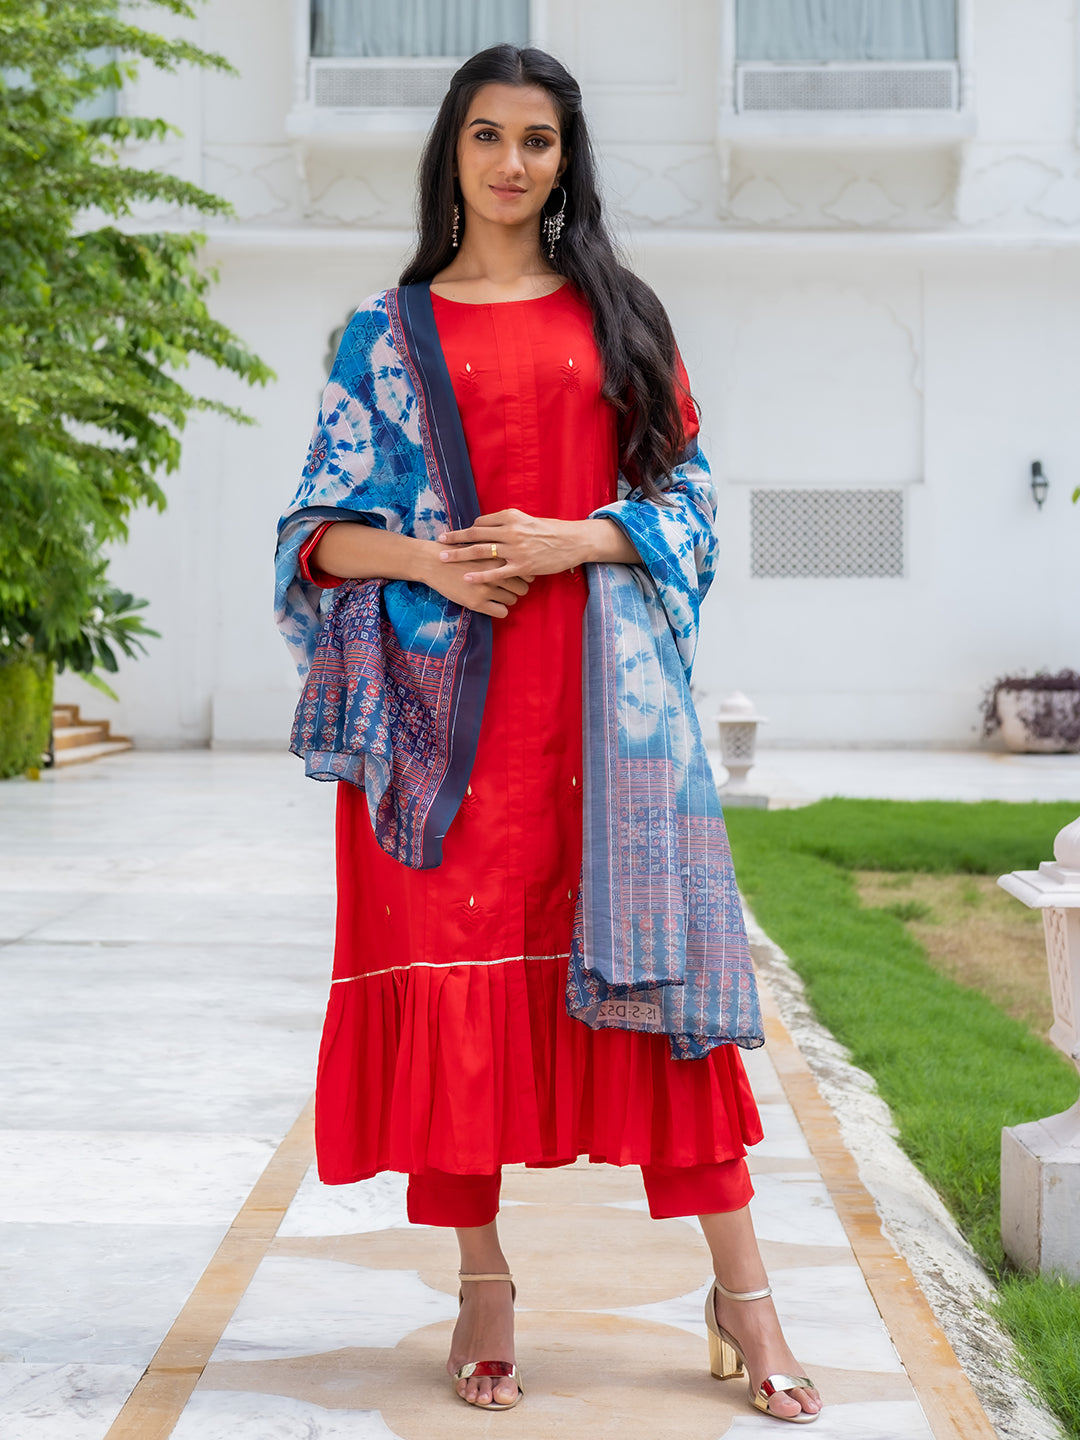 Red Silk Flared Kurta With Pants And Blue Dupatta.